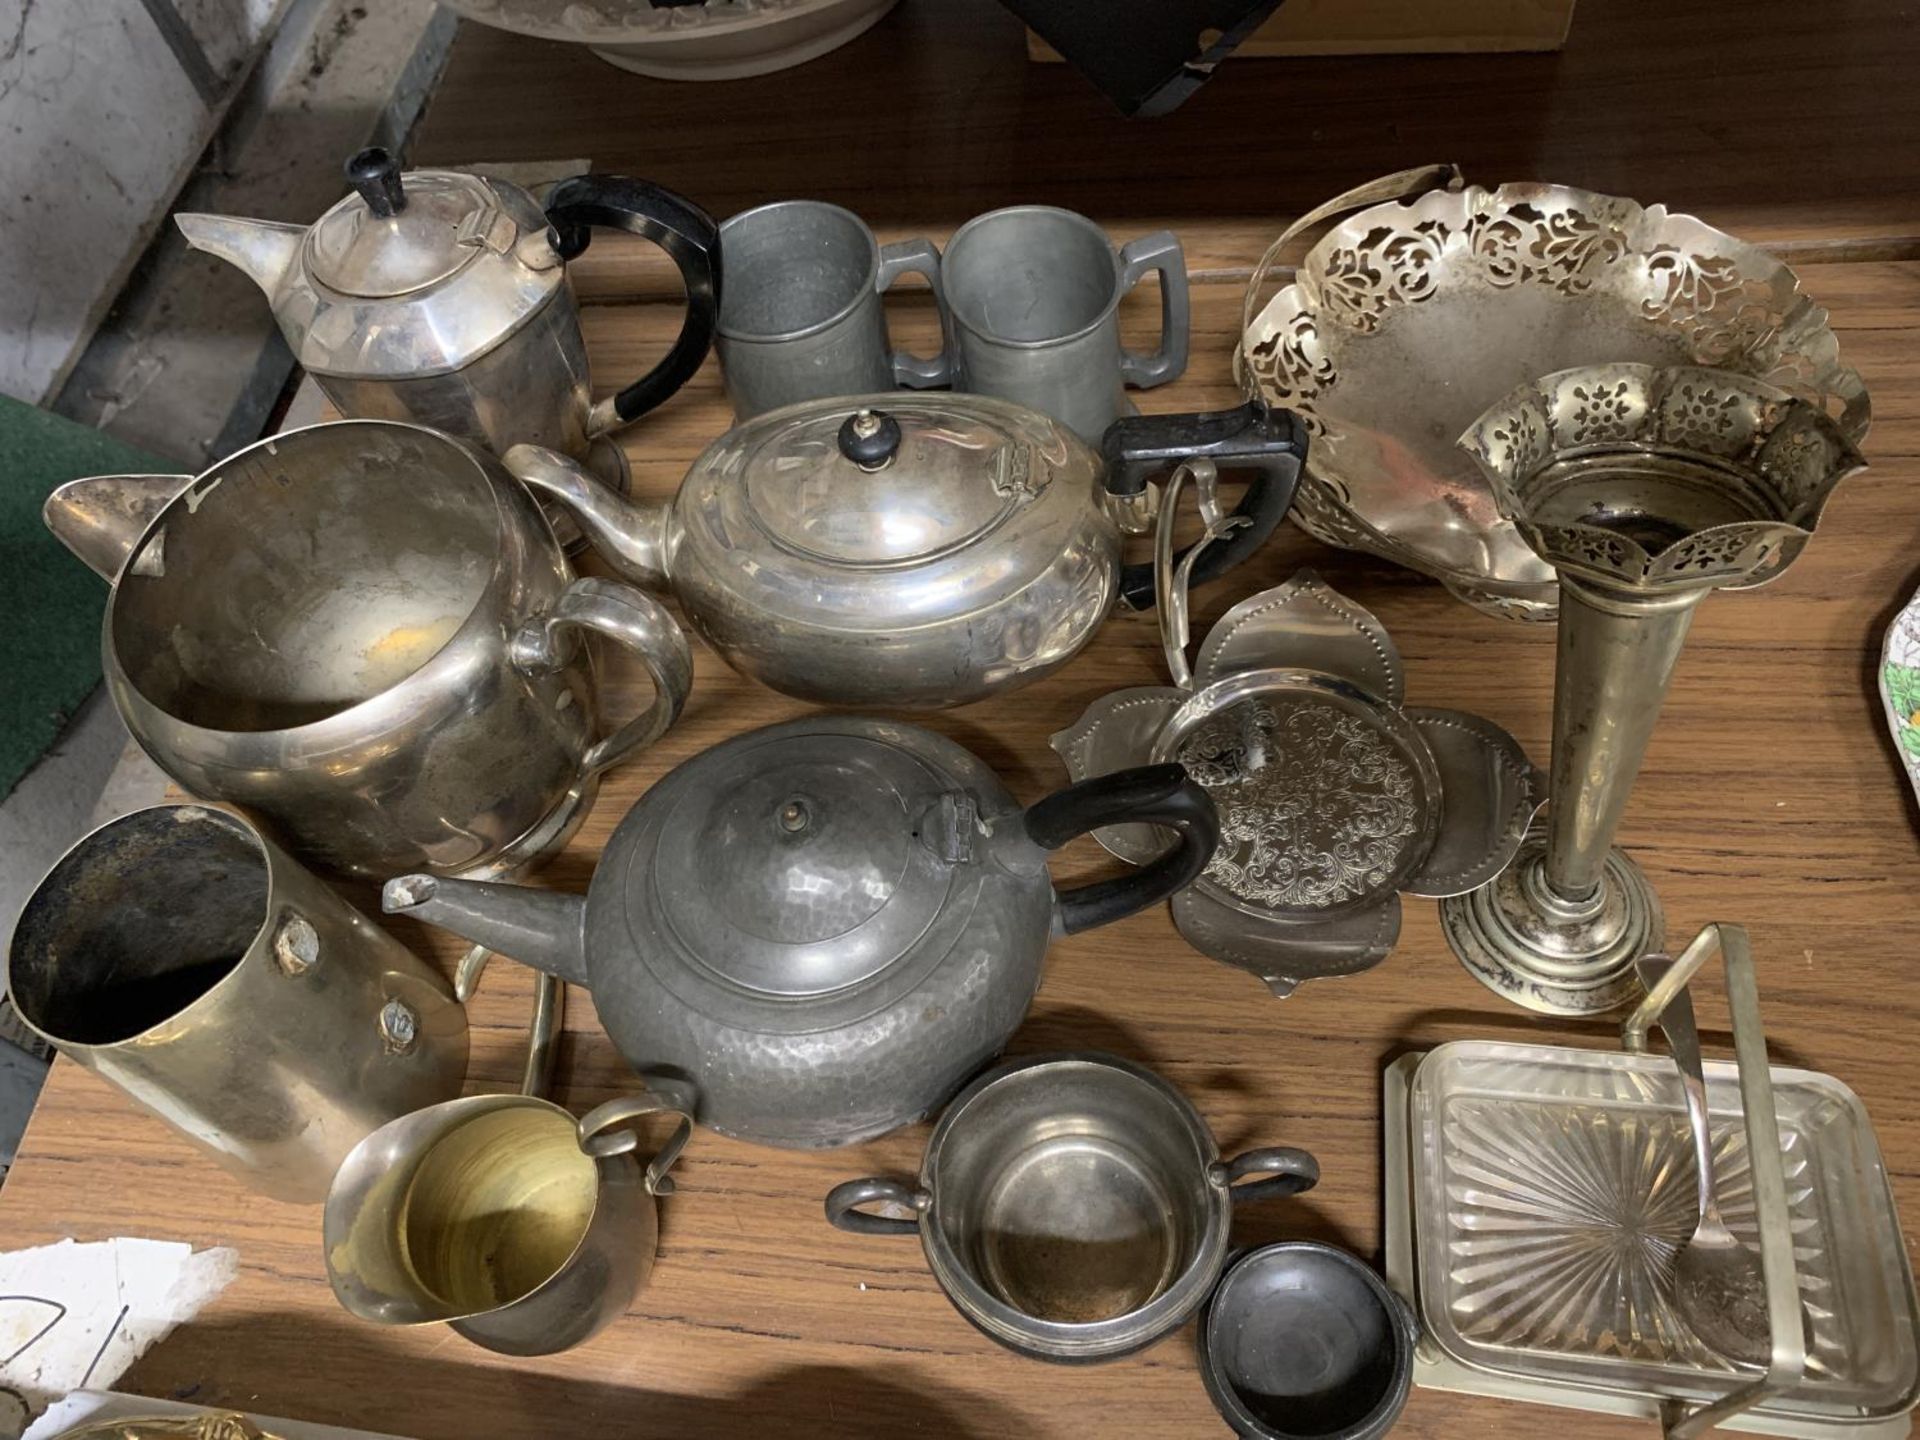 A LARGE QUANTITY OF PEWTER AND SILVER PLATED ITEMS TO INCLUDE TEAPOTS, TANKARDS, JUGS, ETC